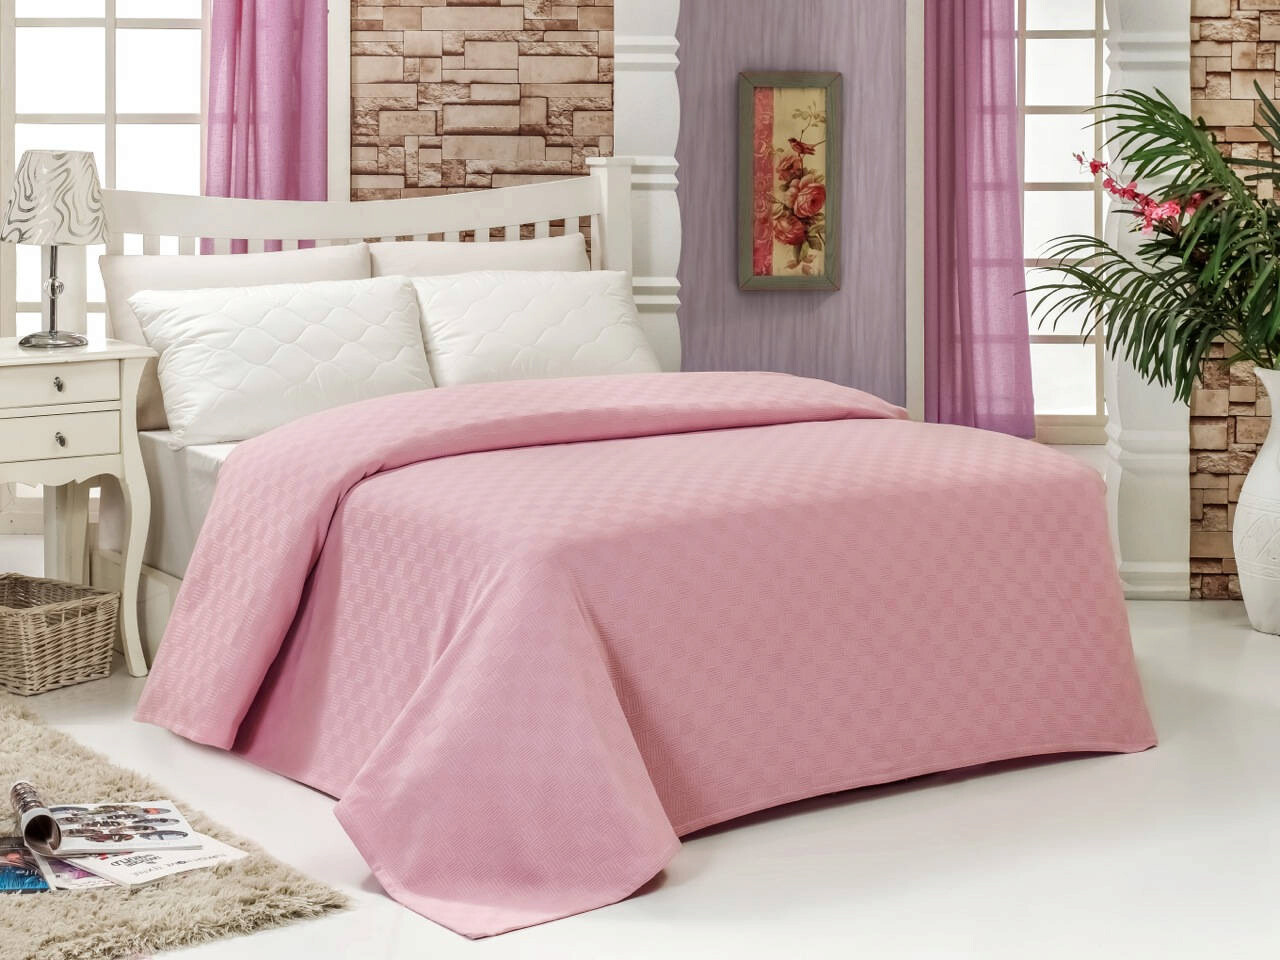 Cuvertura Pique Single, Pink, Bella Carine By Esil Home, Bumbac